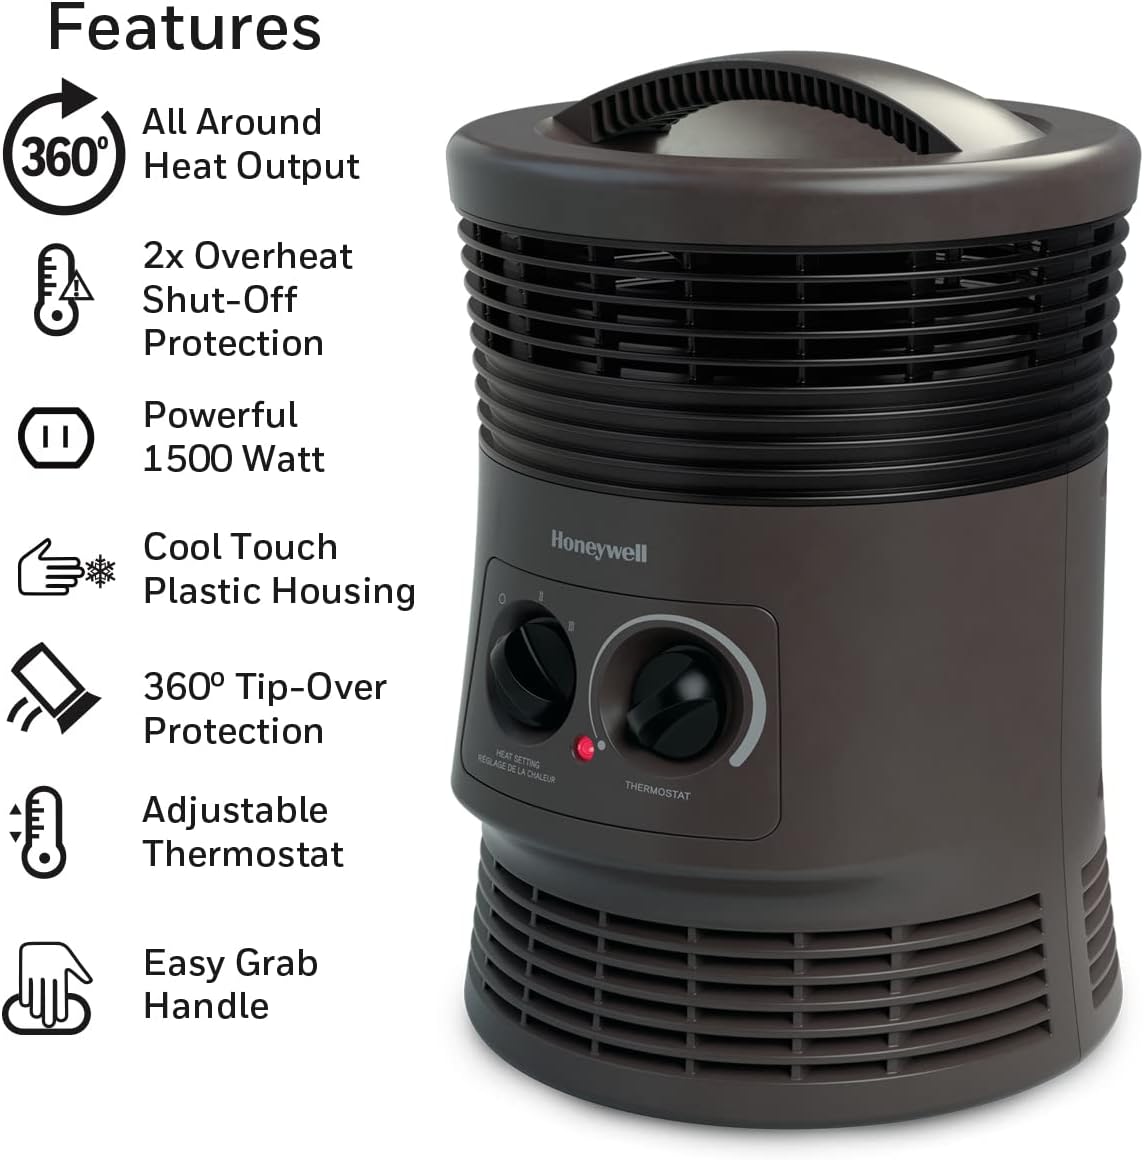 Honeywell HHF360V 360 Degree Surround Fan Forced Heater with Surround Heat Output Charcoal Grey Energy Efficient Portable Heater with Adjustable Thermostat  2 Heat Settings, Small